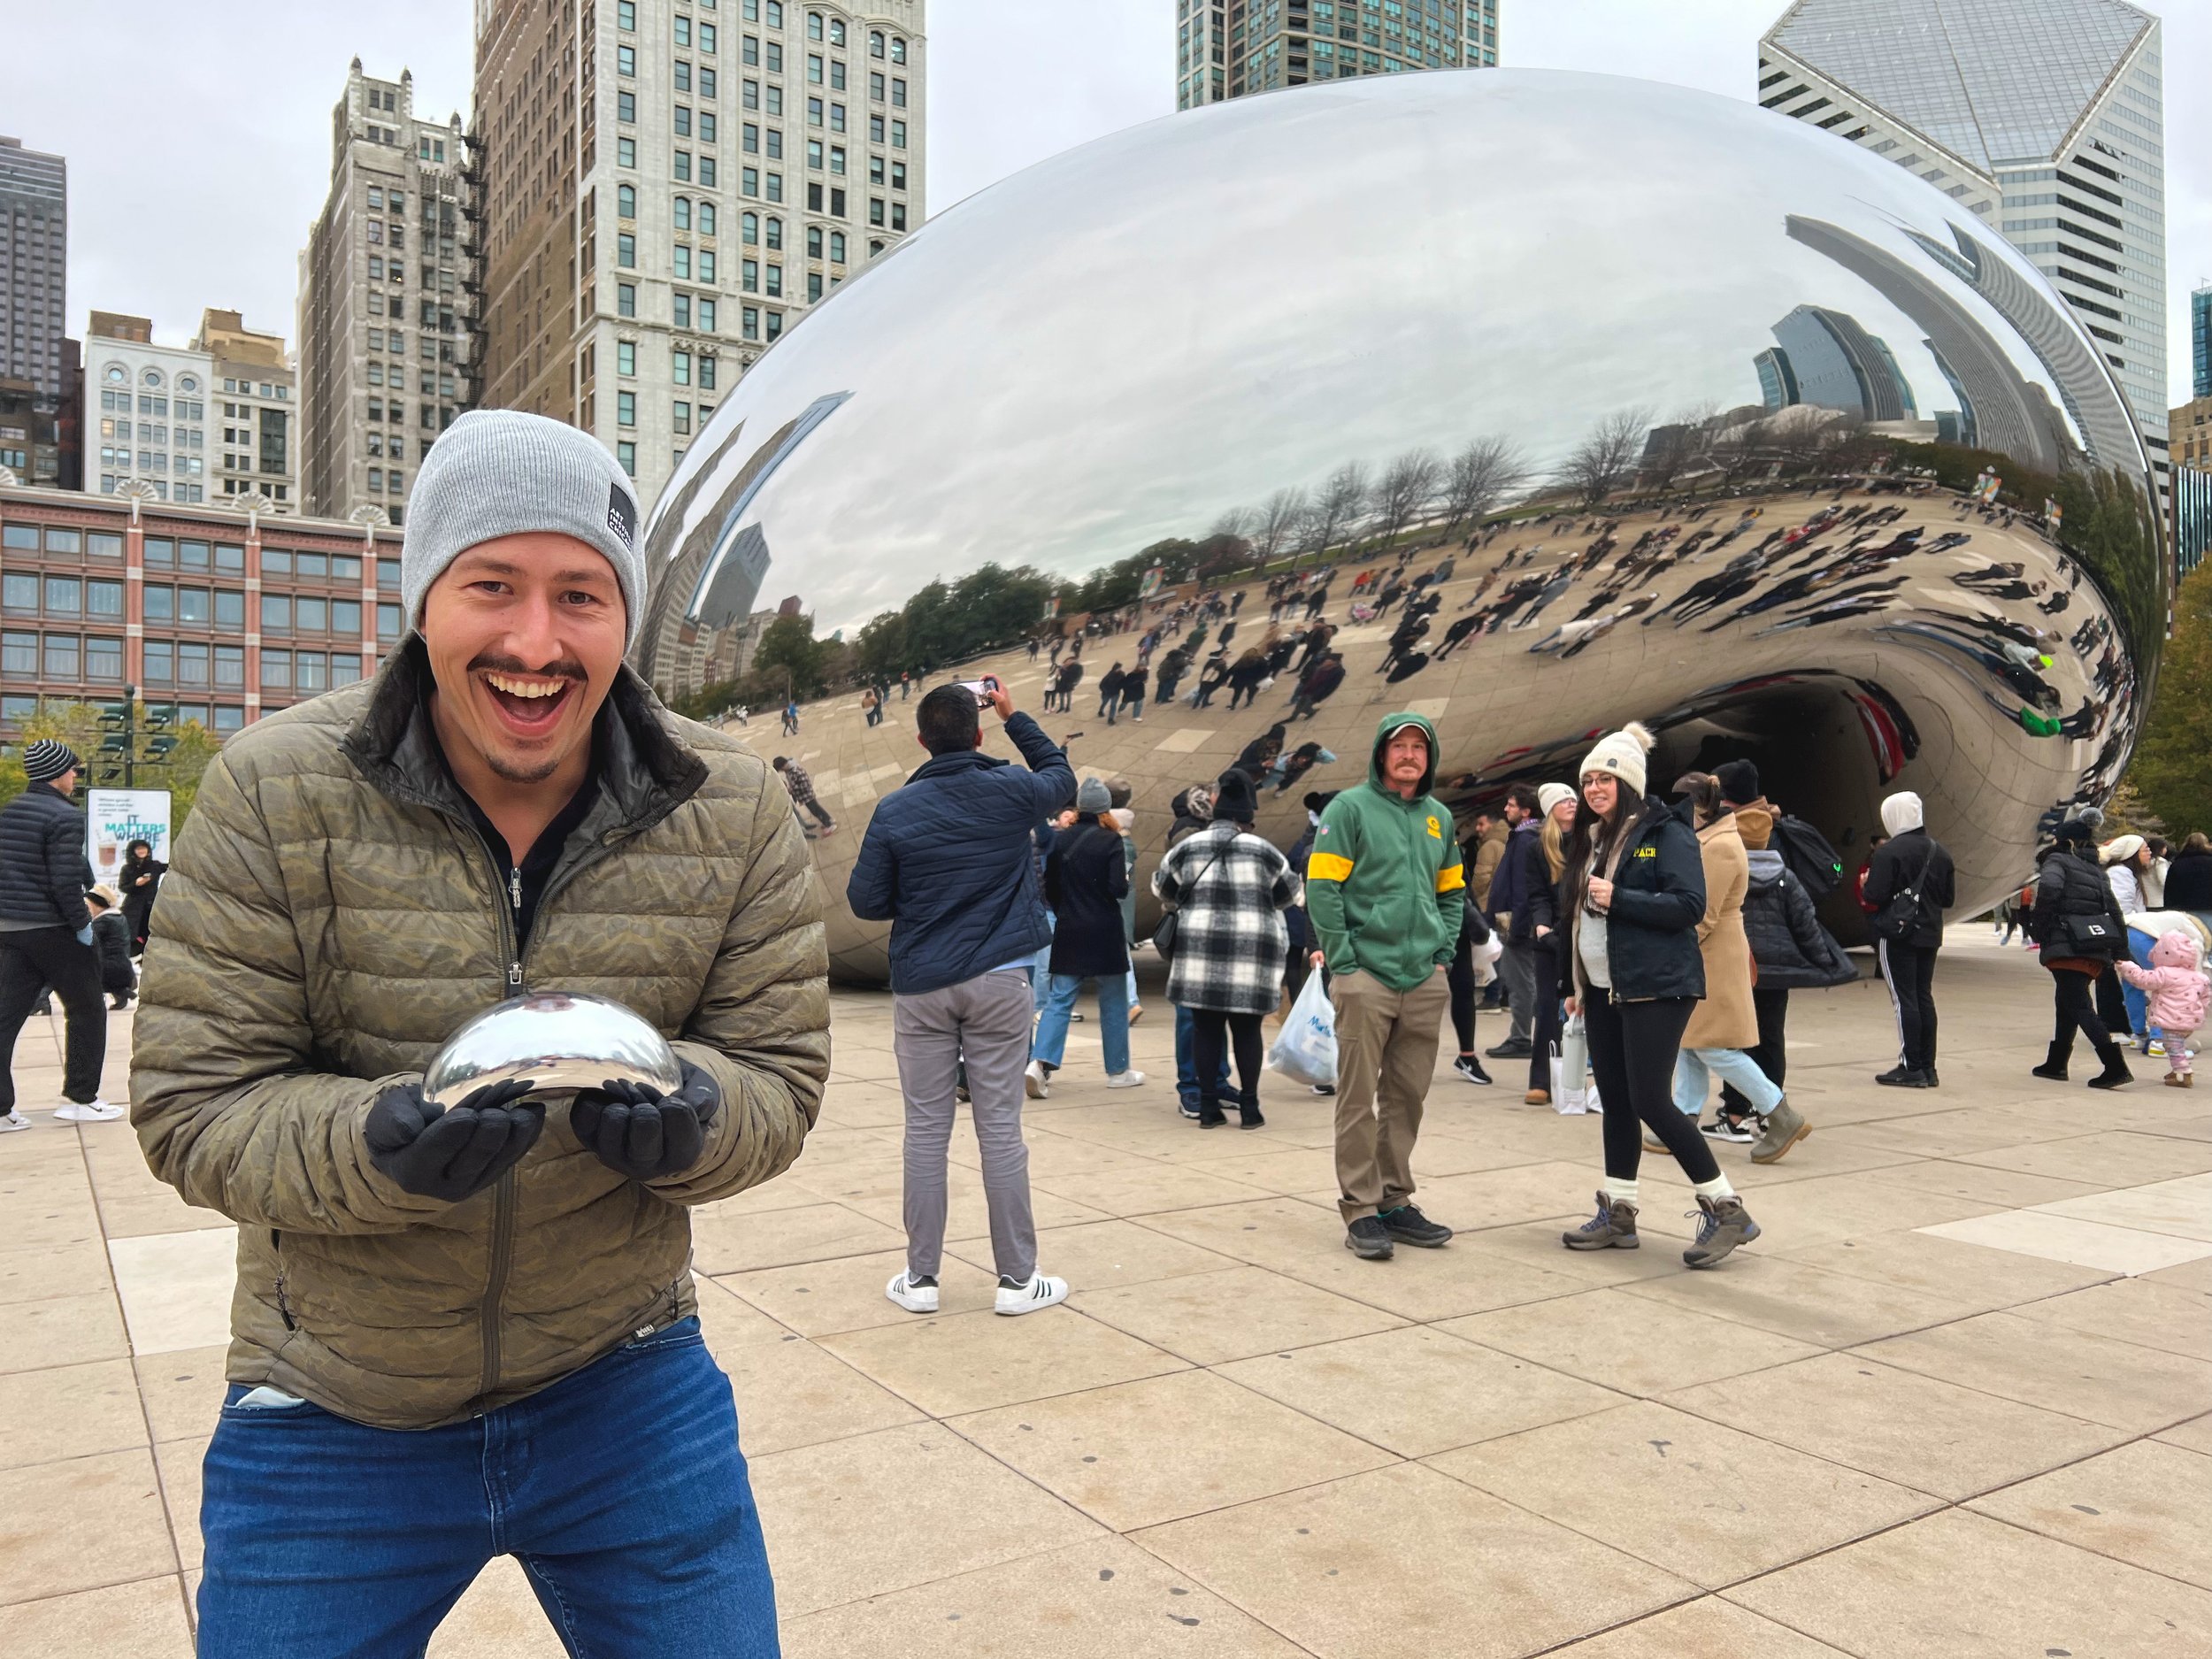  Wes Haynie, AIA, poses with famous Cloud Gate sculpture  